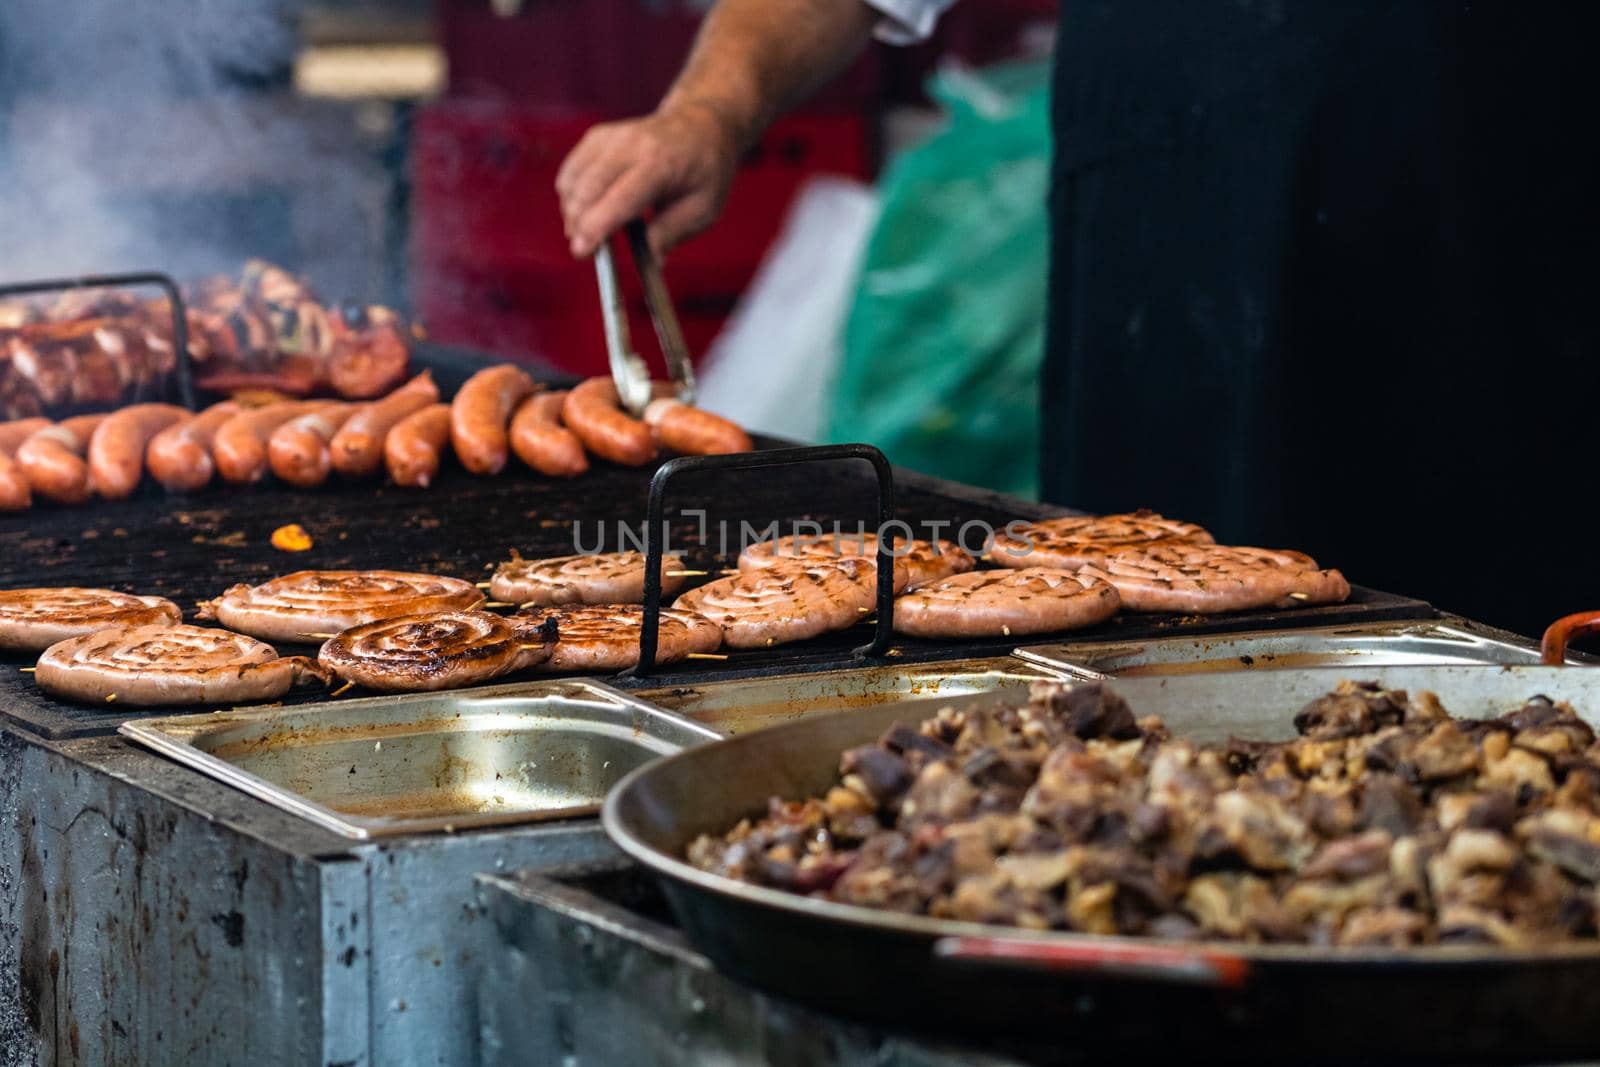 Grilling tasty food on barbecue. Steak, sausages on grill at food festival by vladispas